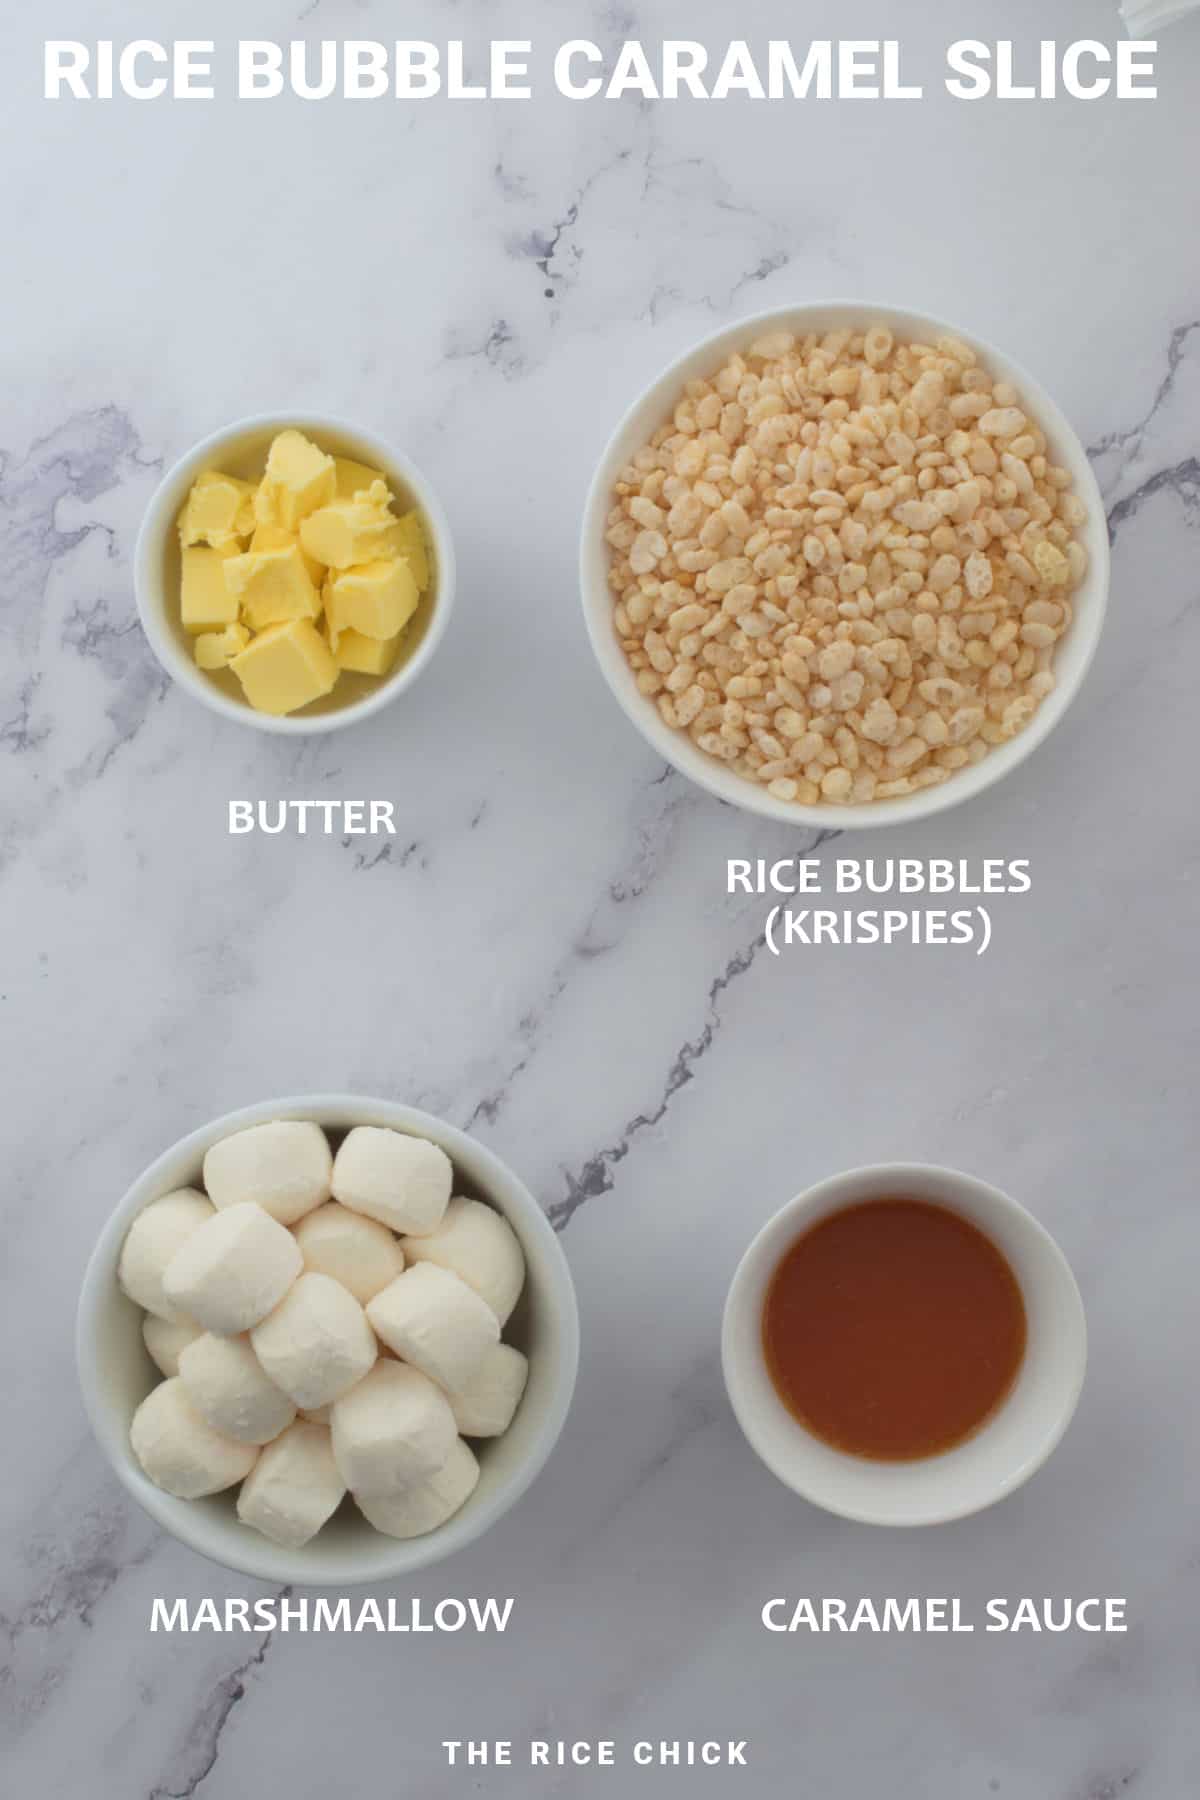 Ingredients for rice bubble caramel slice.